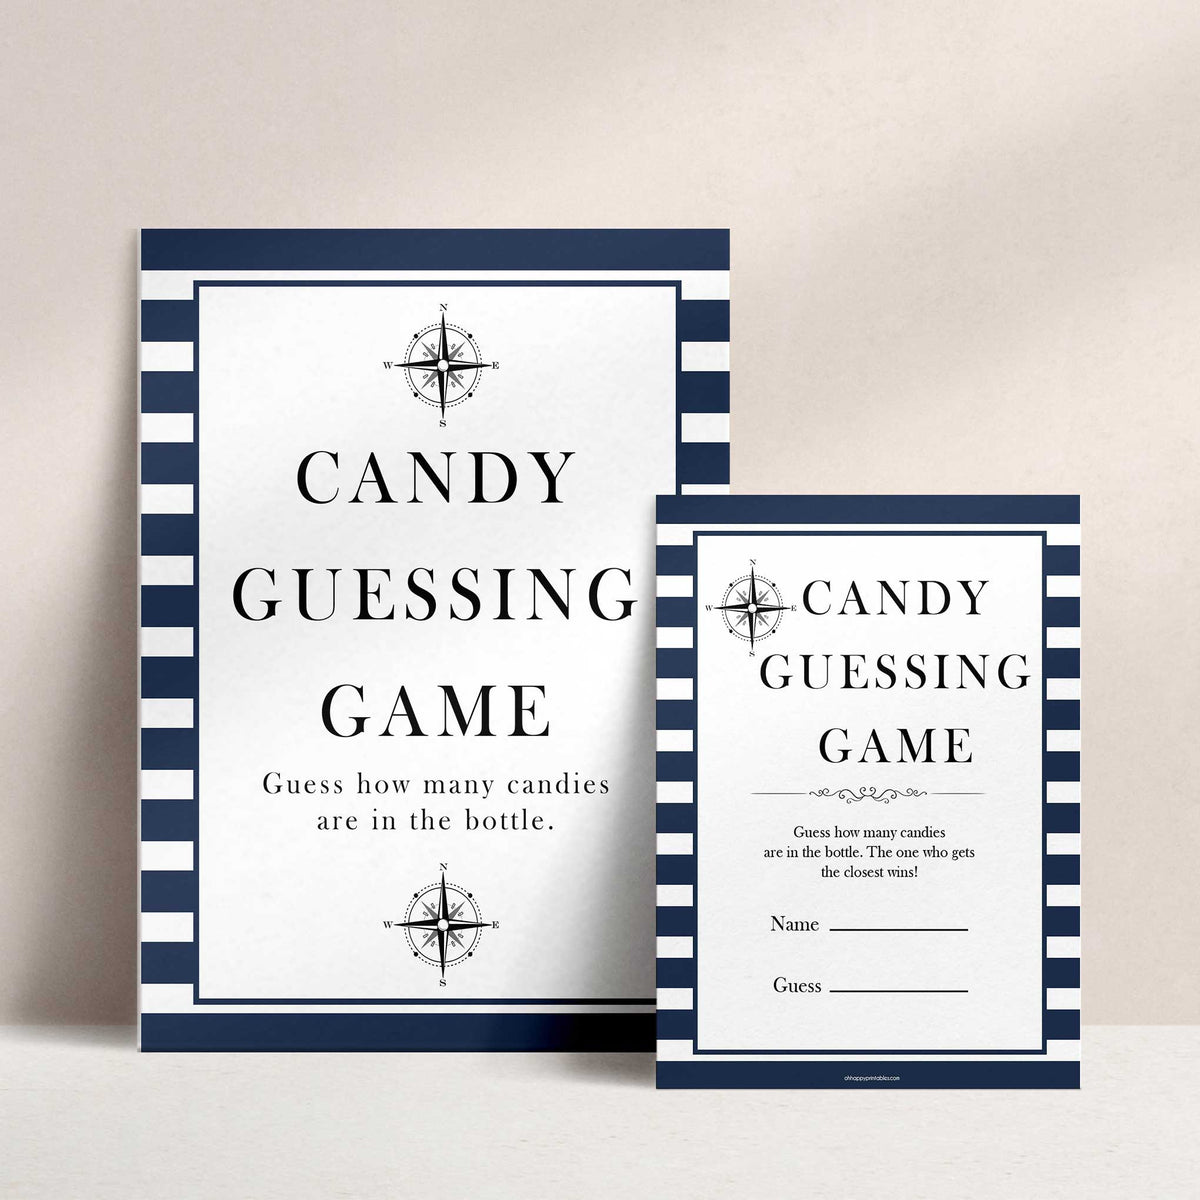 Nautical baby shower games, candy guessing game baby shower games, printable baby shower games, baby shower games, fun baby games, popular baby shower games, sailor baby games, boat baby games